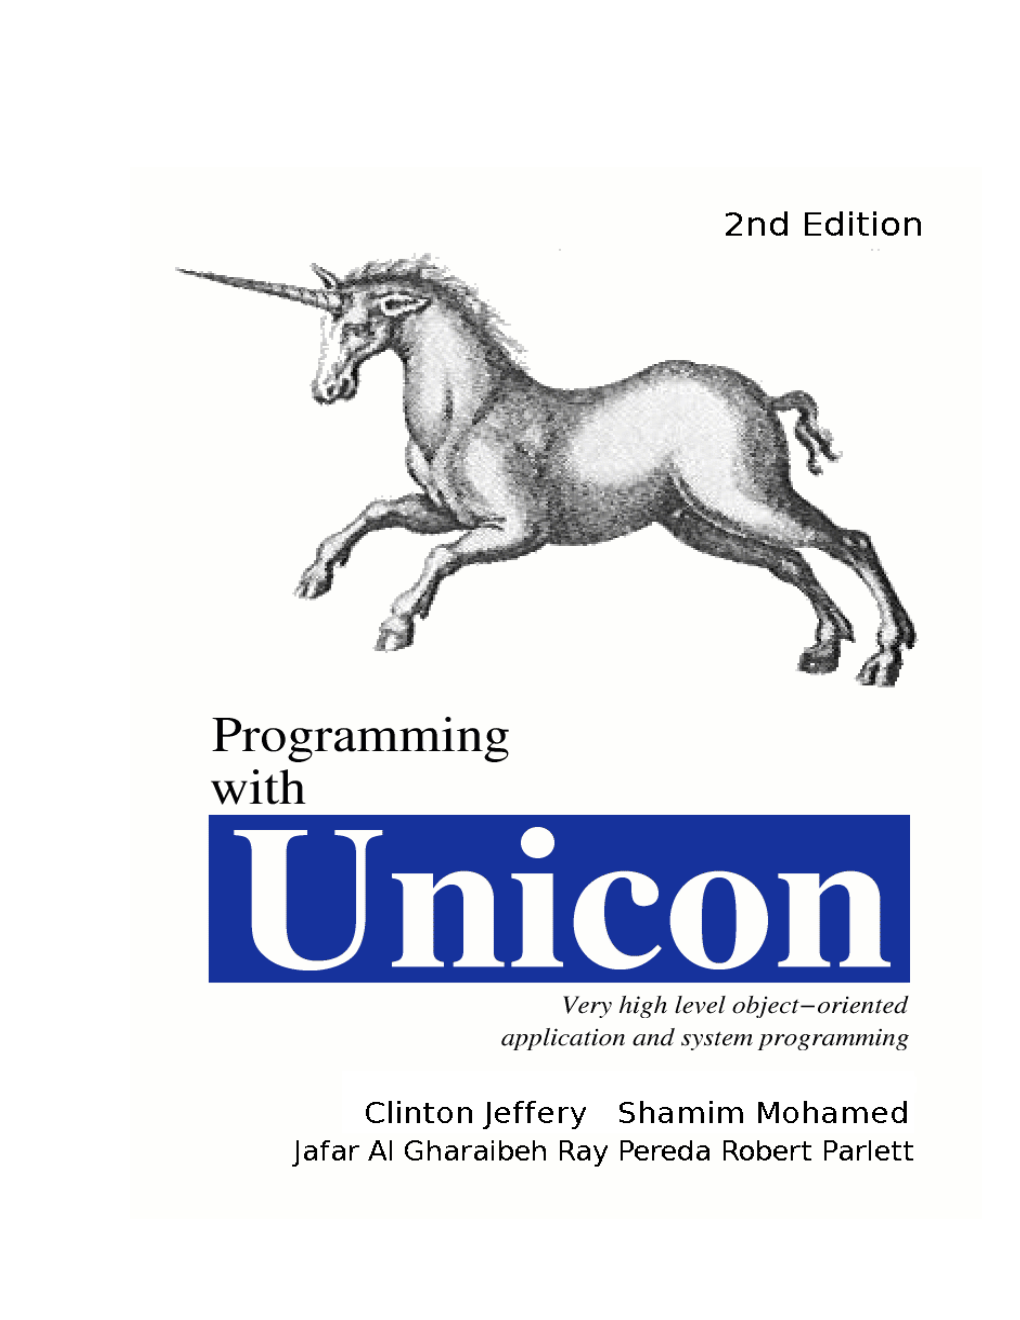 Programming with Unicon